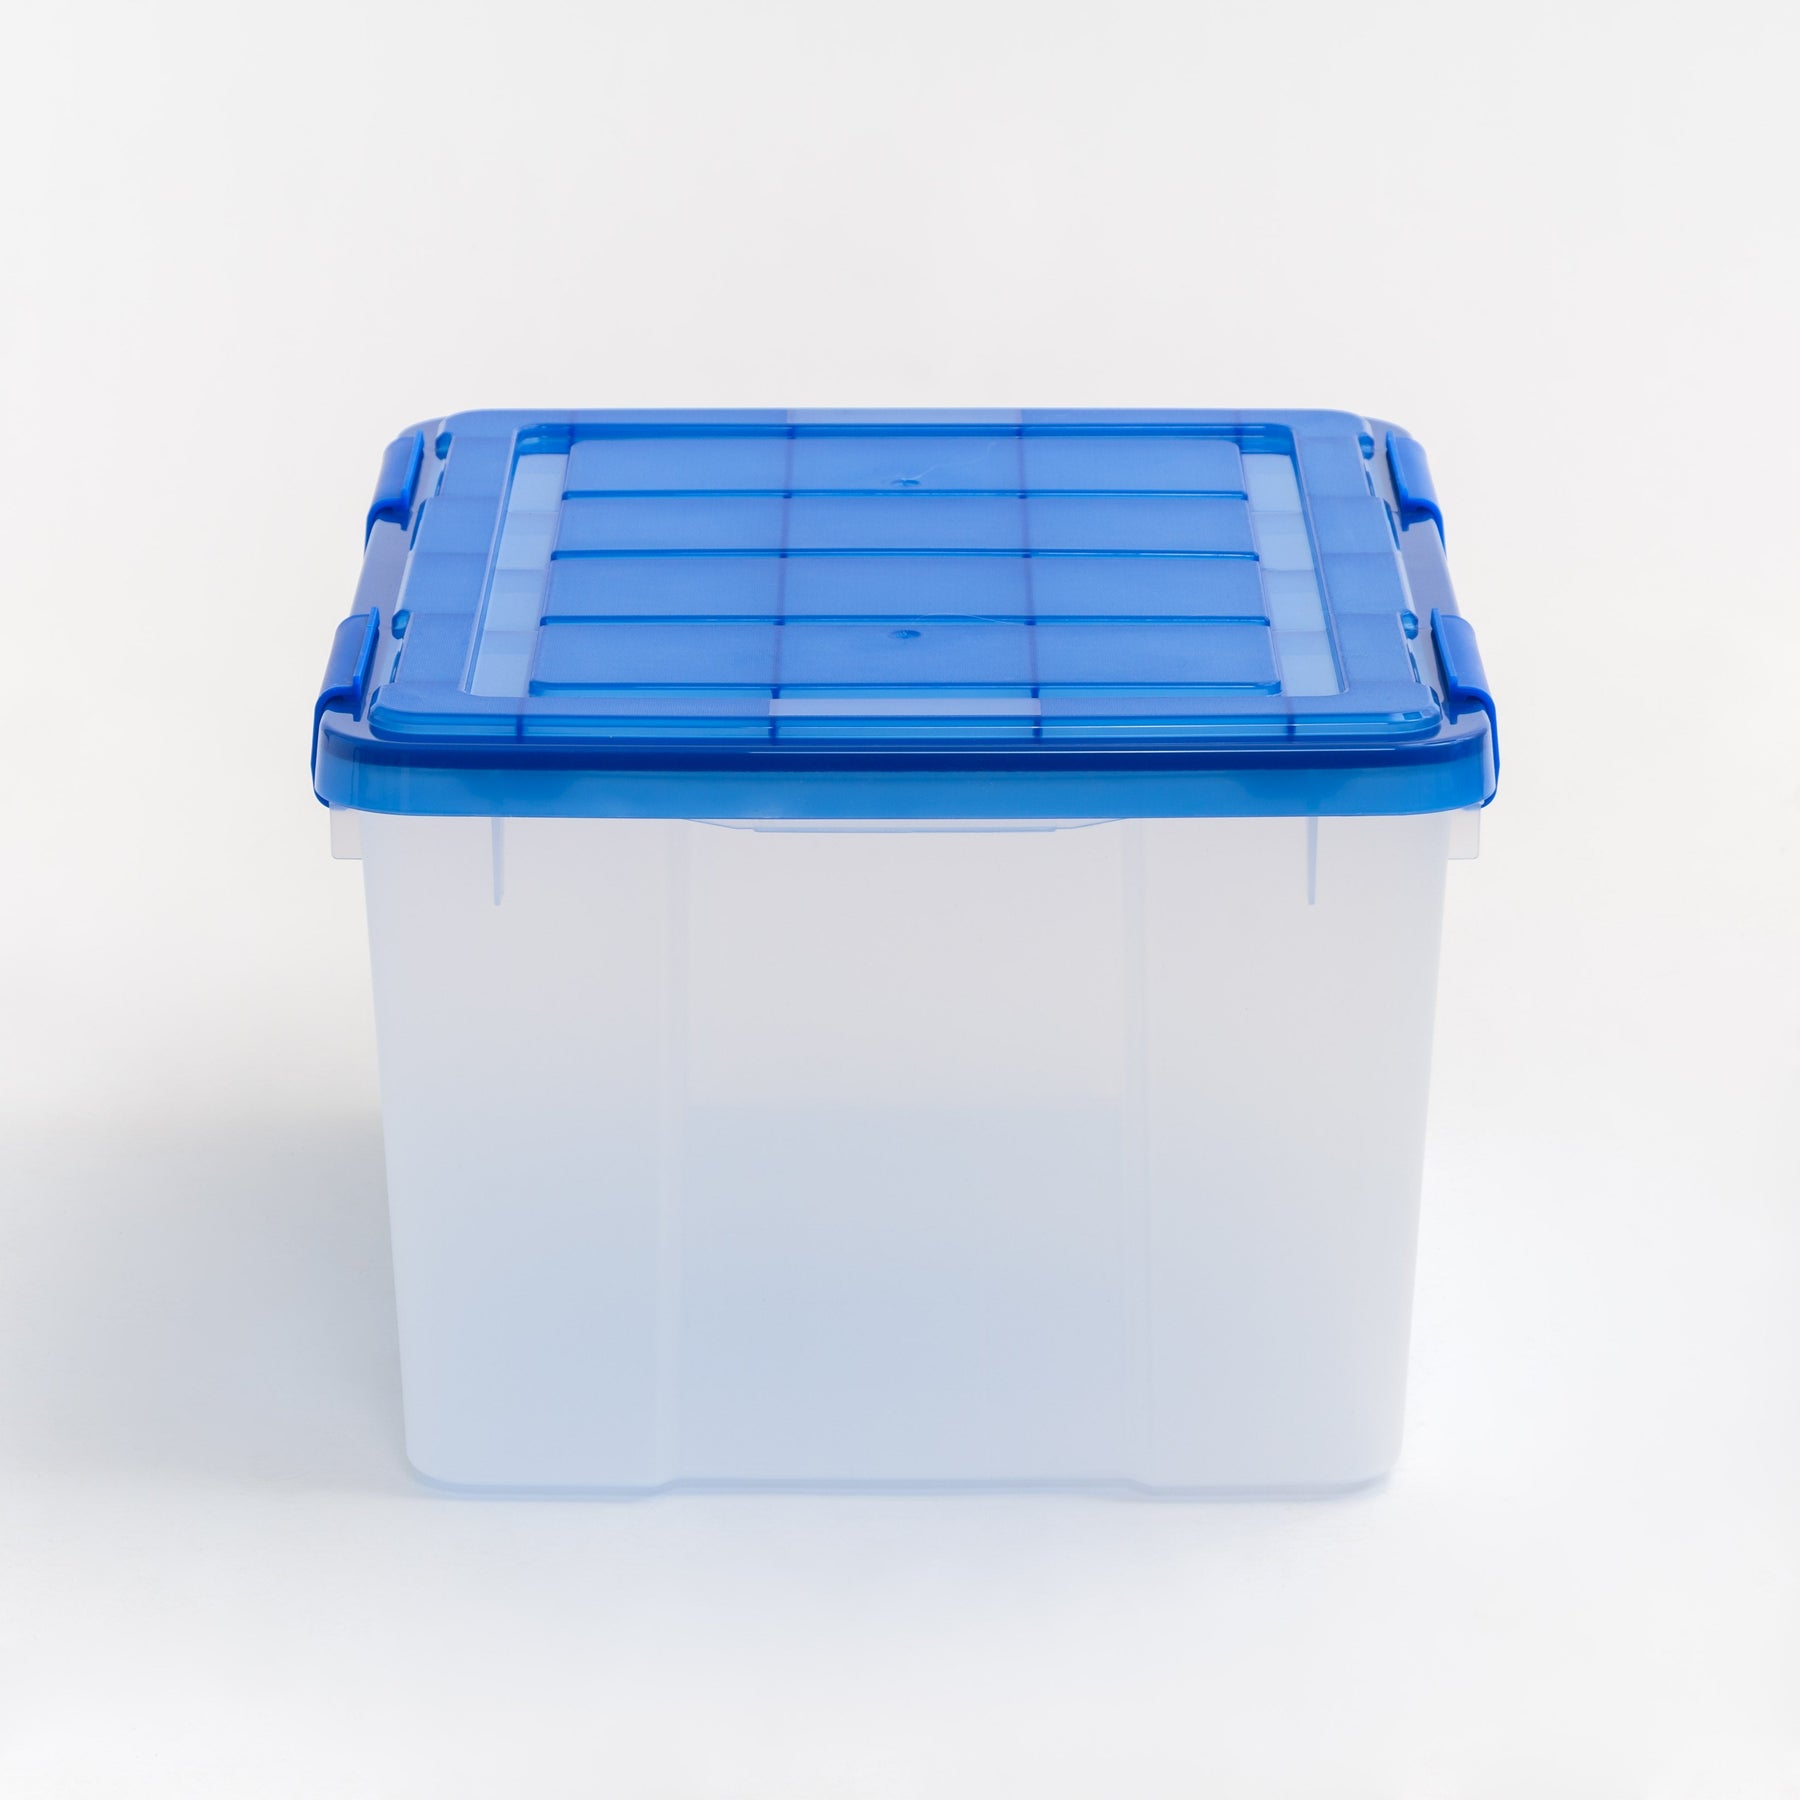 Iris Storage Container with Lid, Clear, 11 Gallon, 3 ct